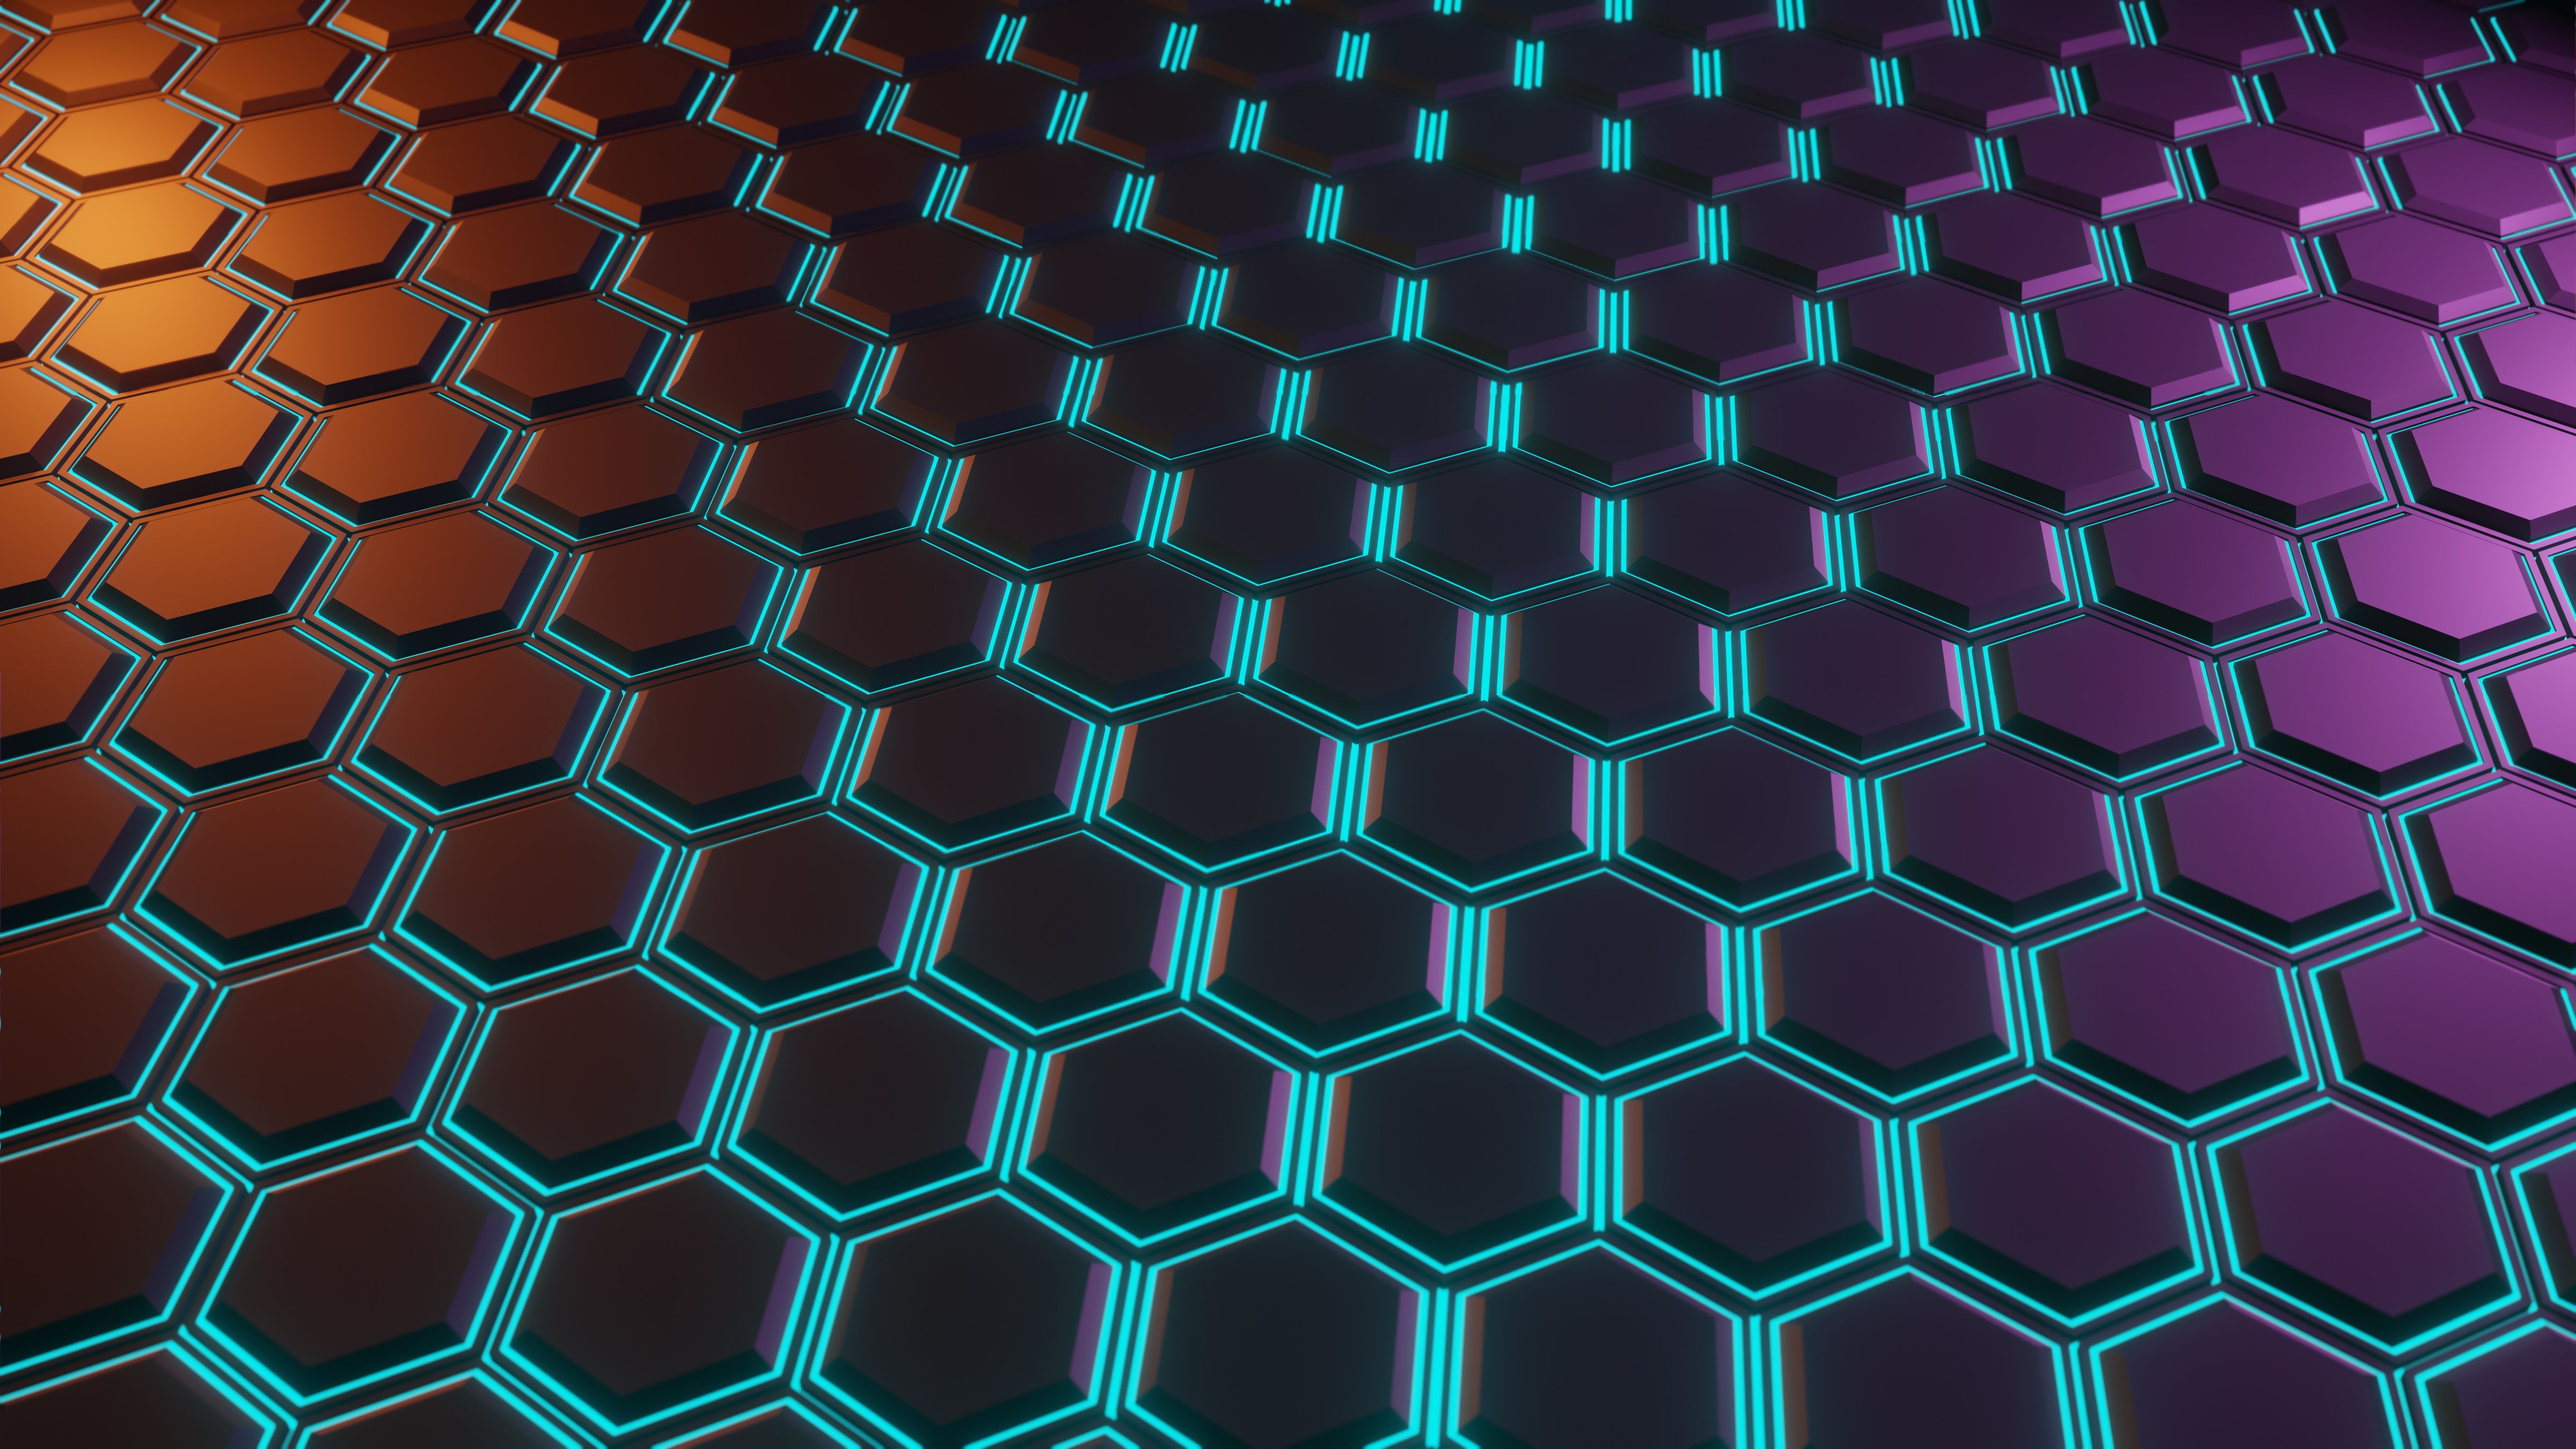 4K New Hexagon Pattern Wallpaper, HD Abstract 4K Wallpaper, Image, Photo and Background